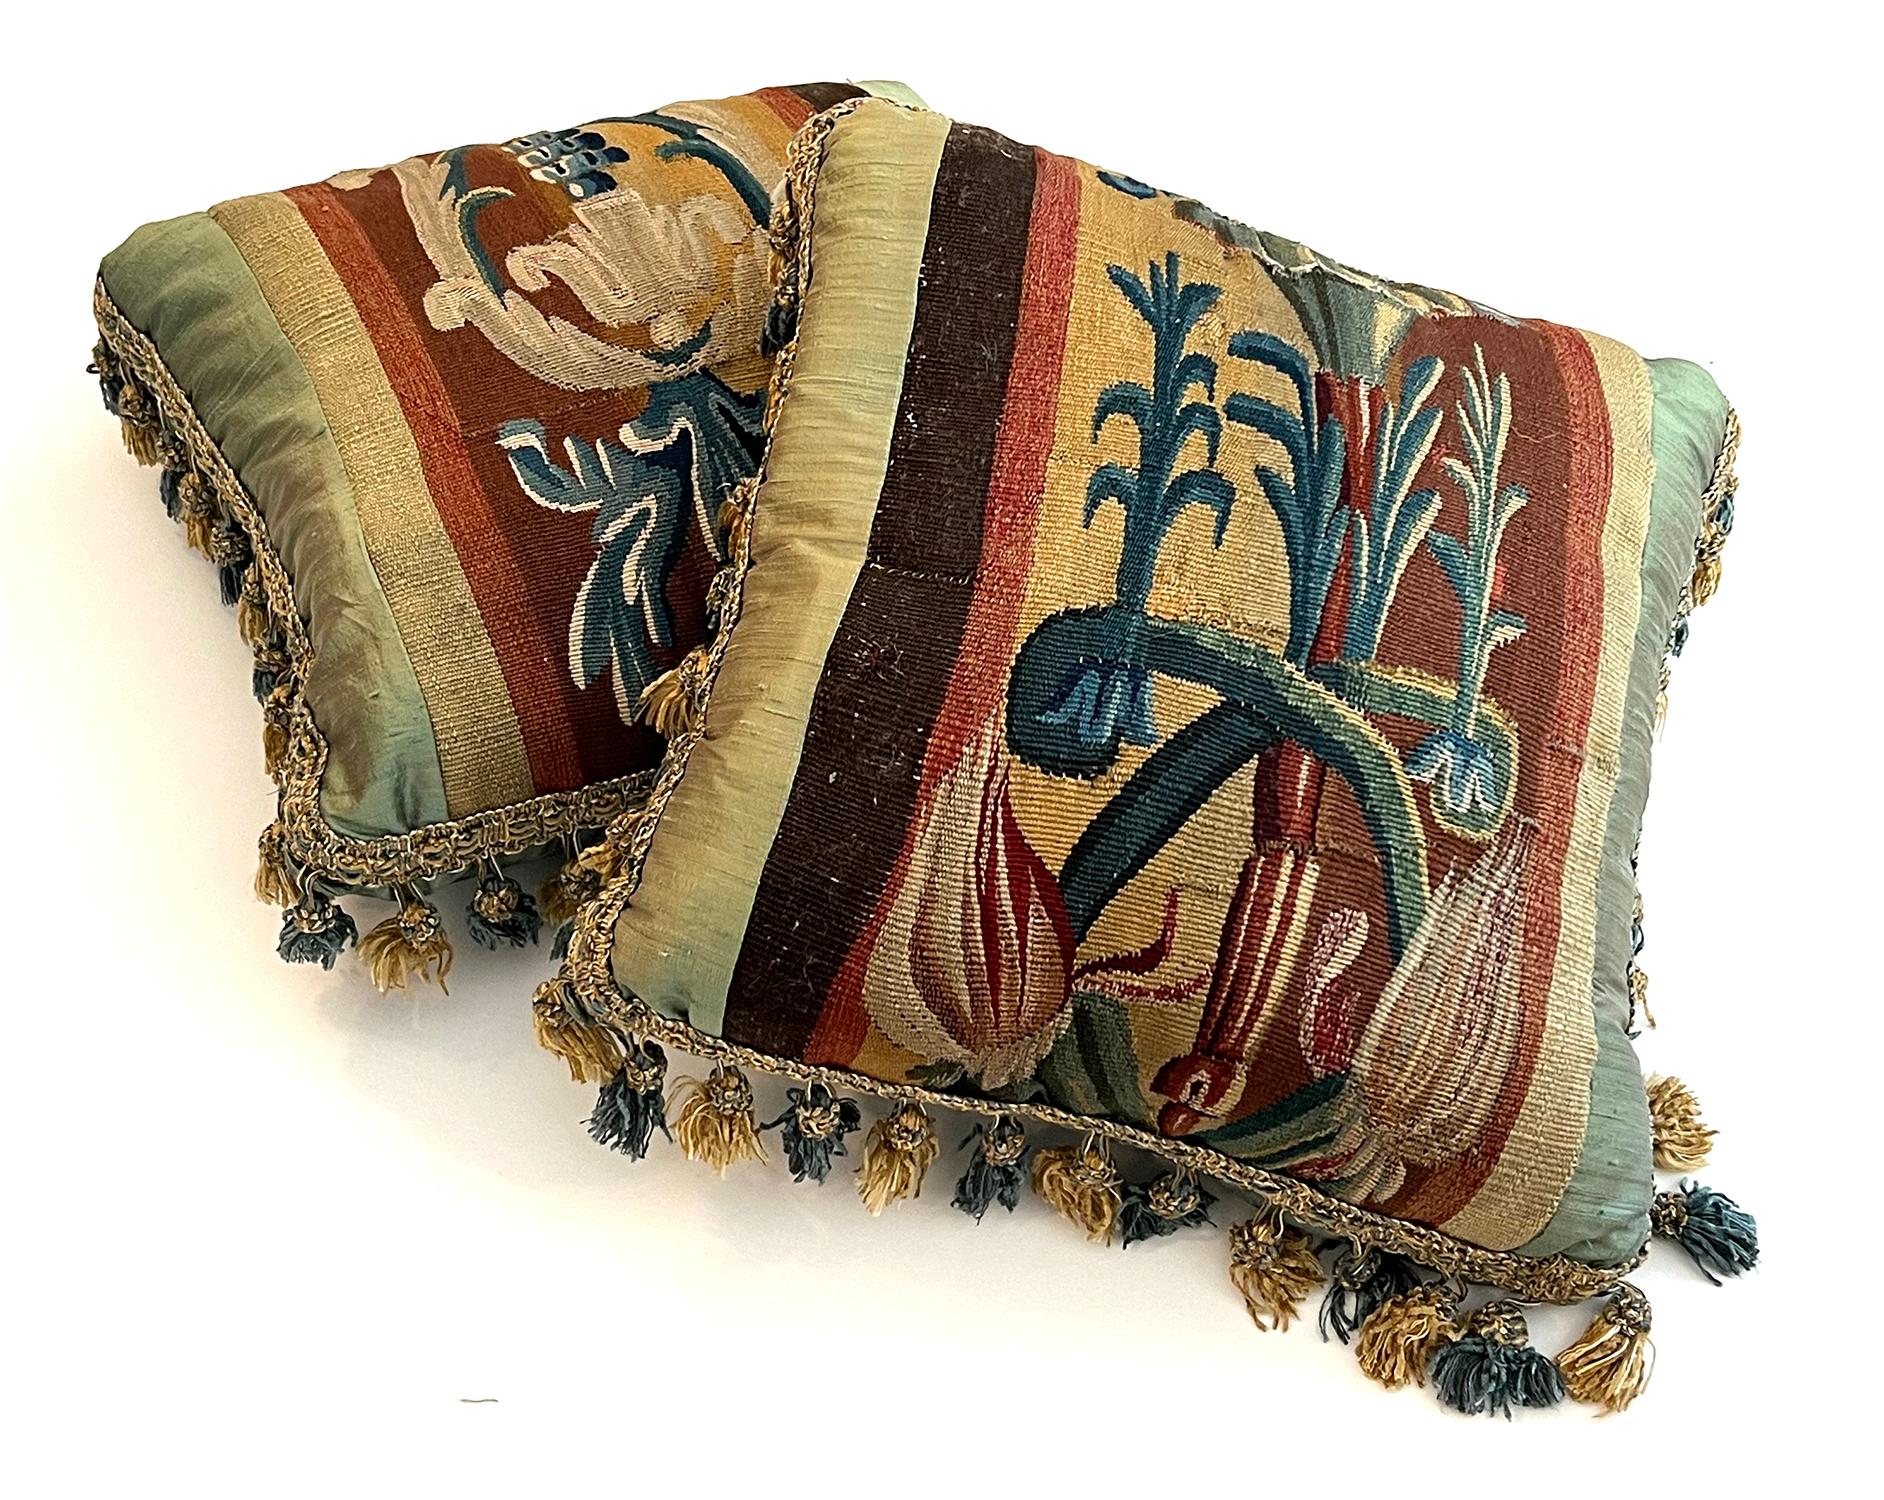 Belgian Pair of Antique 18th Century European Tapestry Pillows With Tassels For Sale